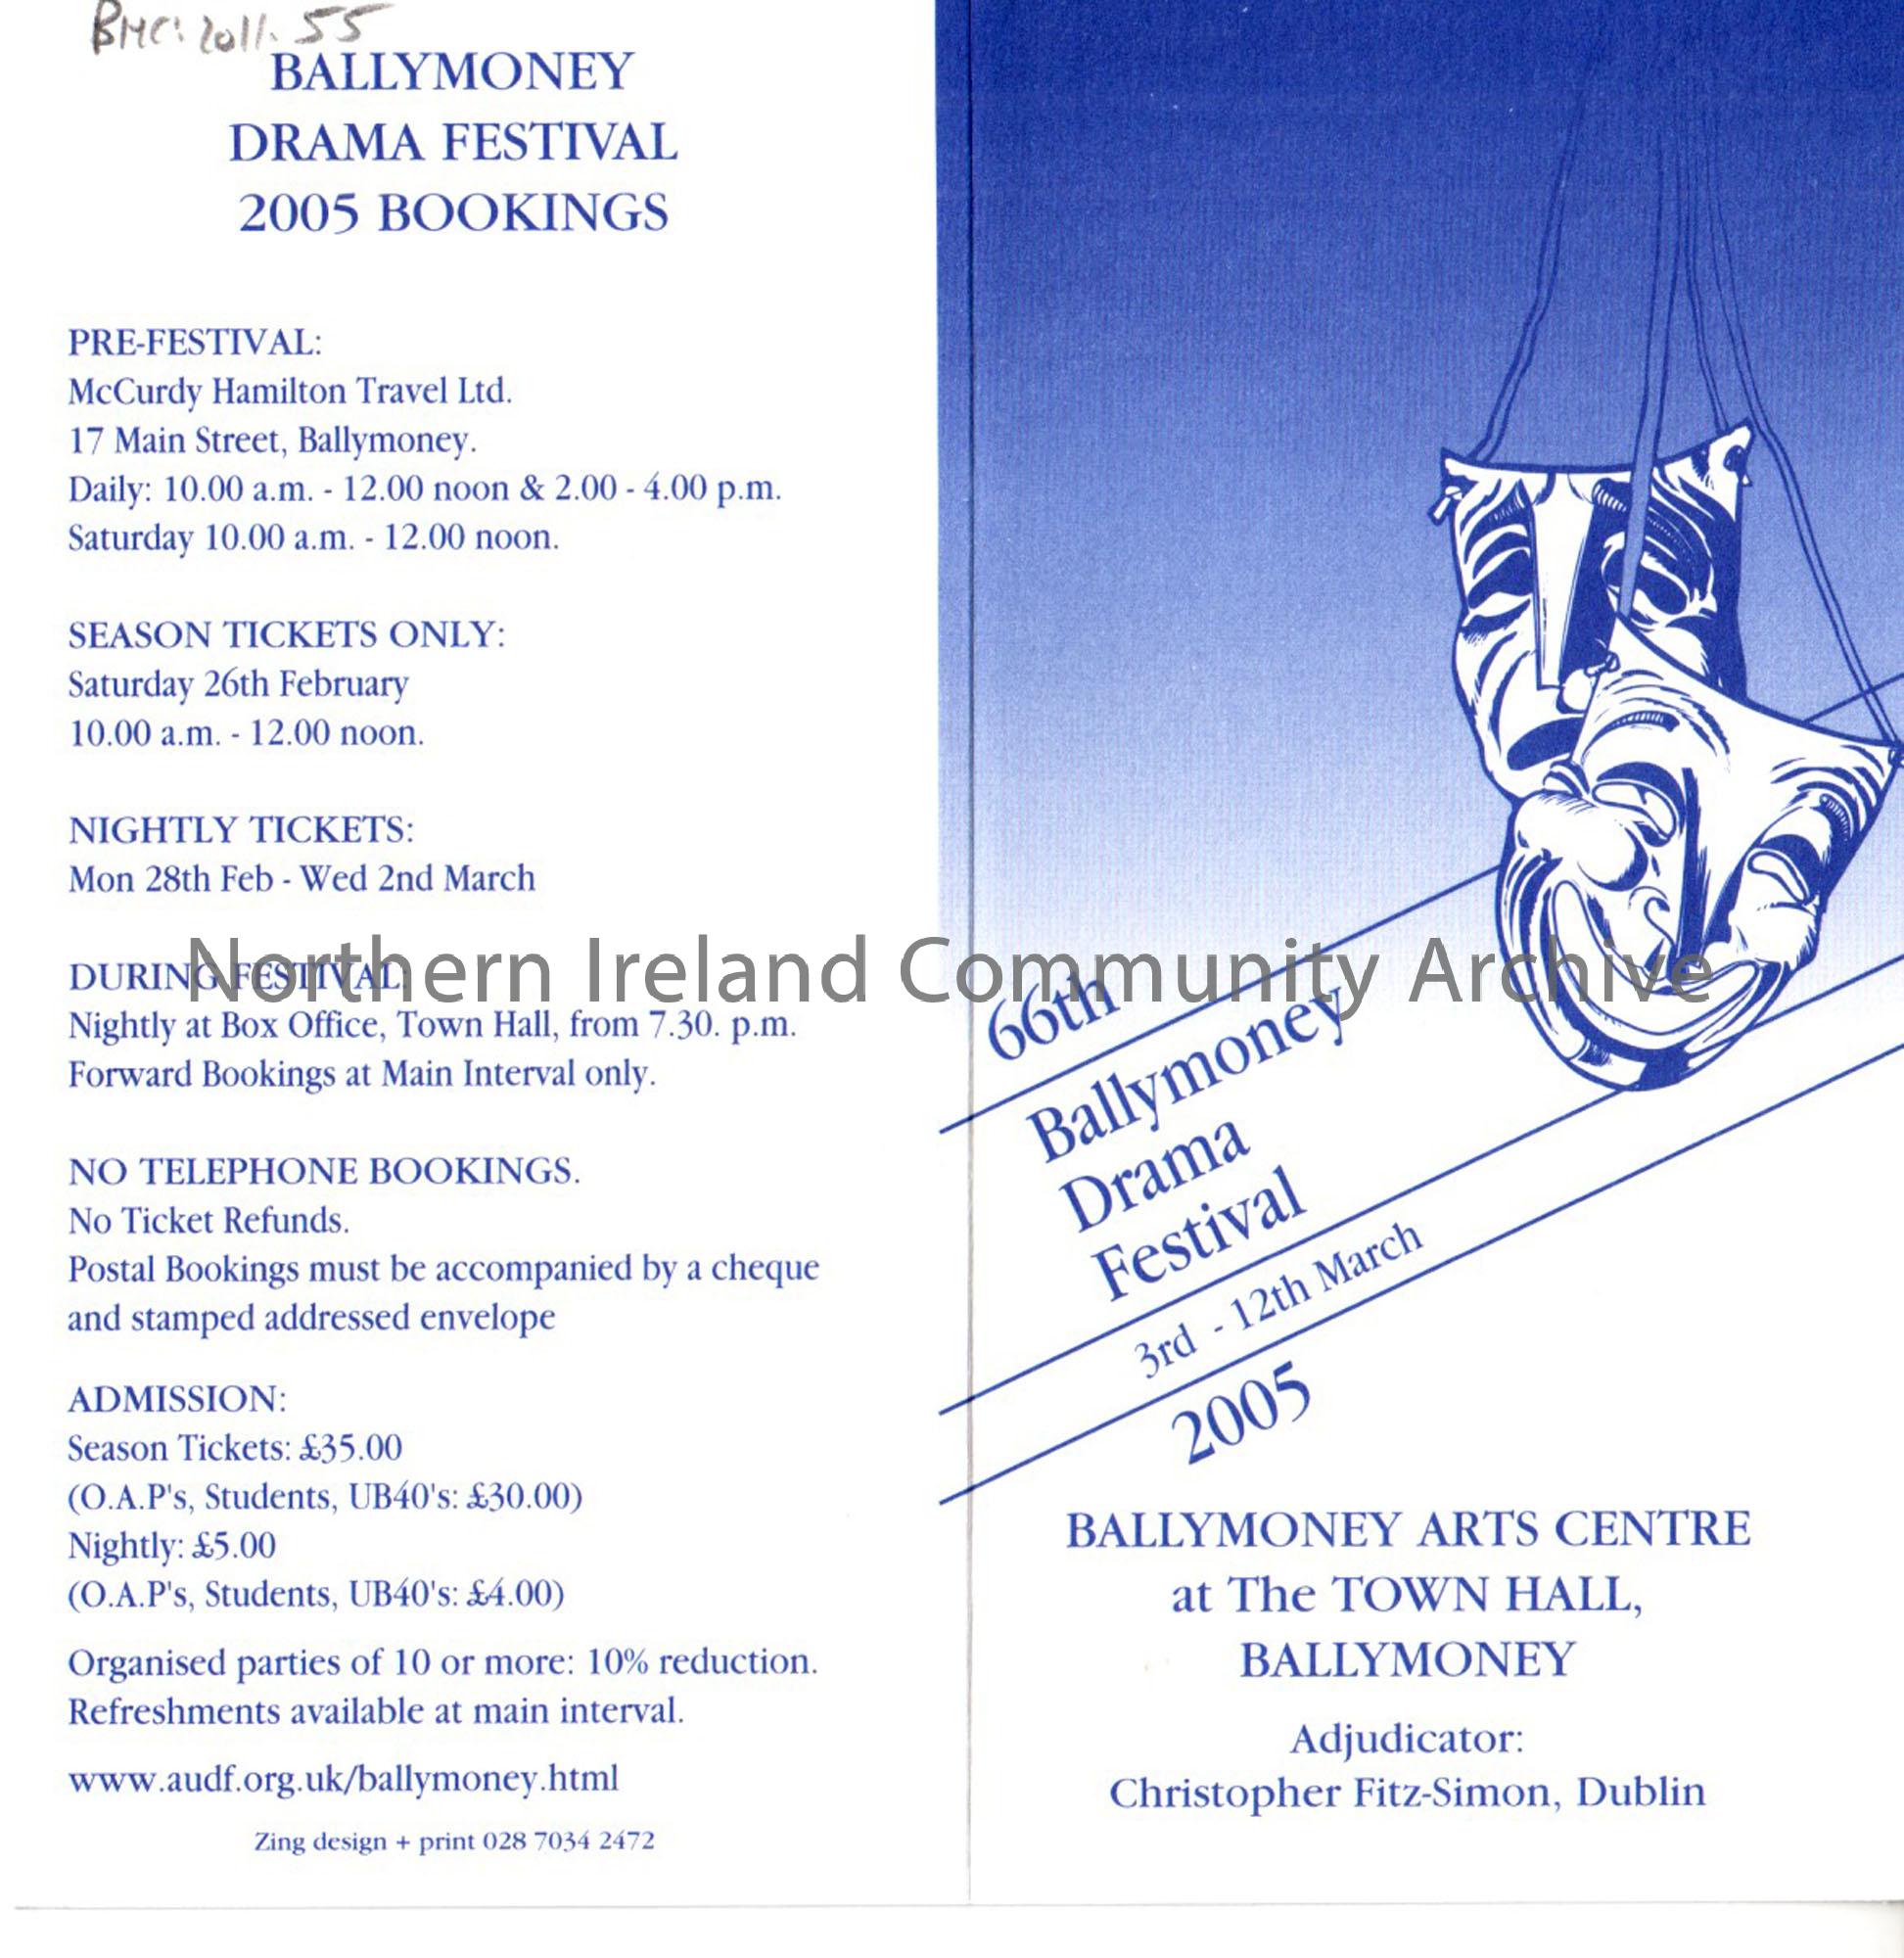 flier for the 66th Ballymoney Drama Festival 3rd to 12th March 2005